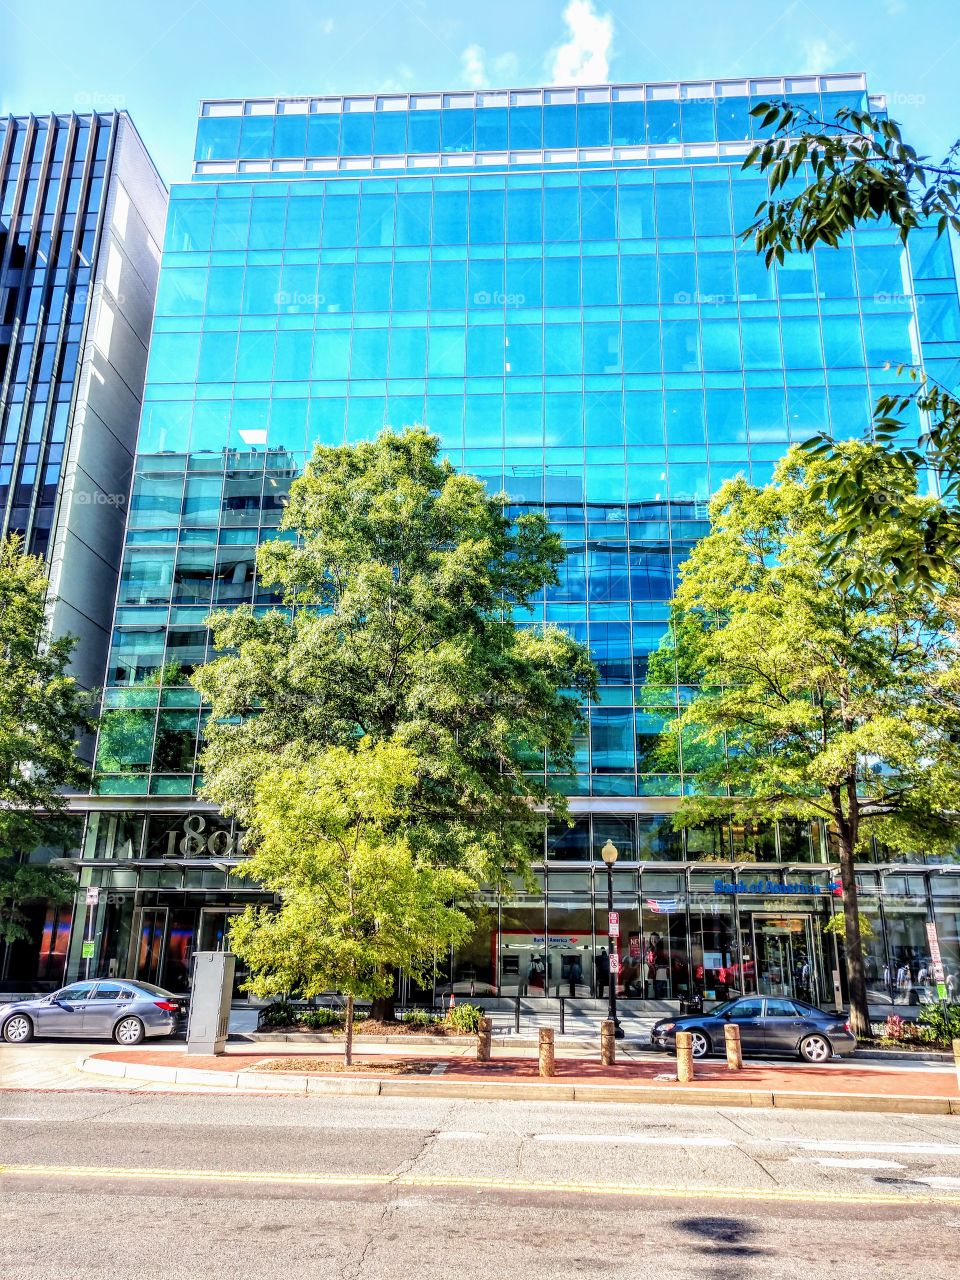 Washington DC city streets with beautiful glass office buildings!!!